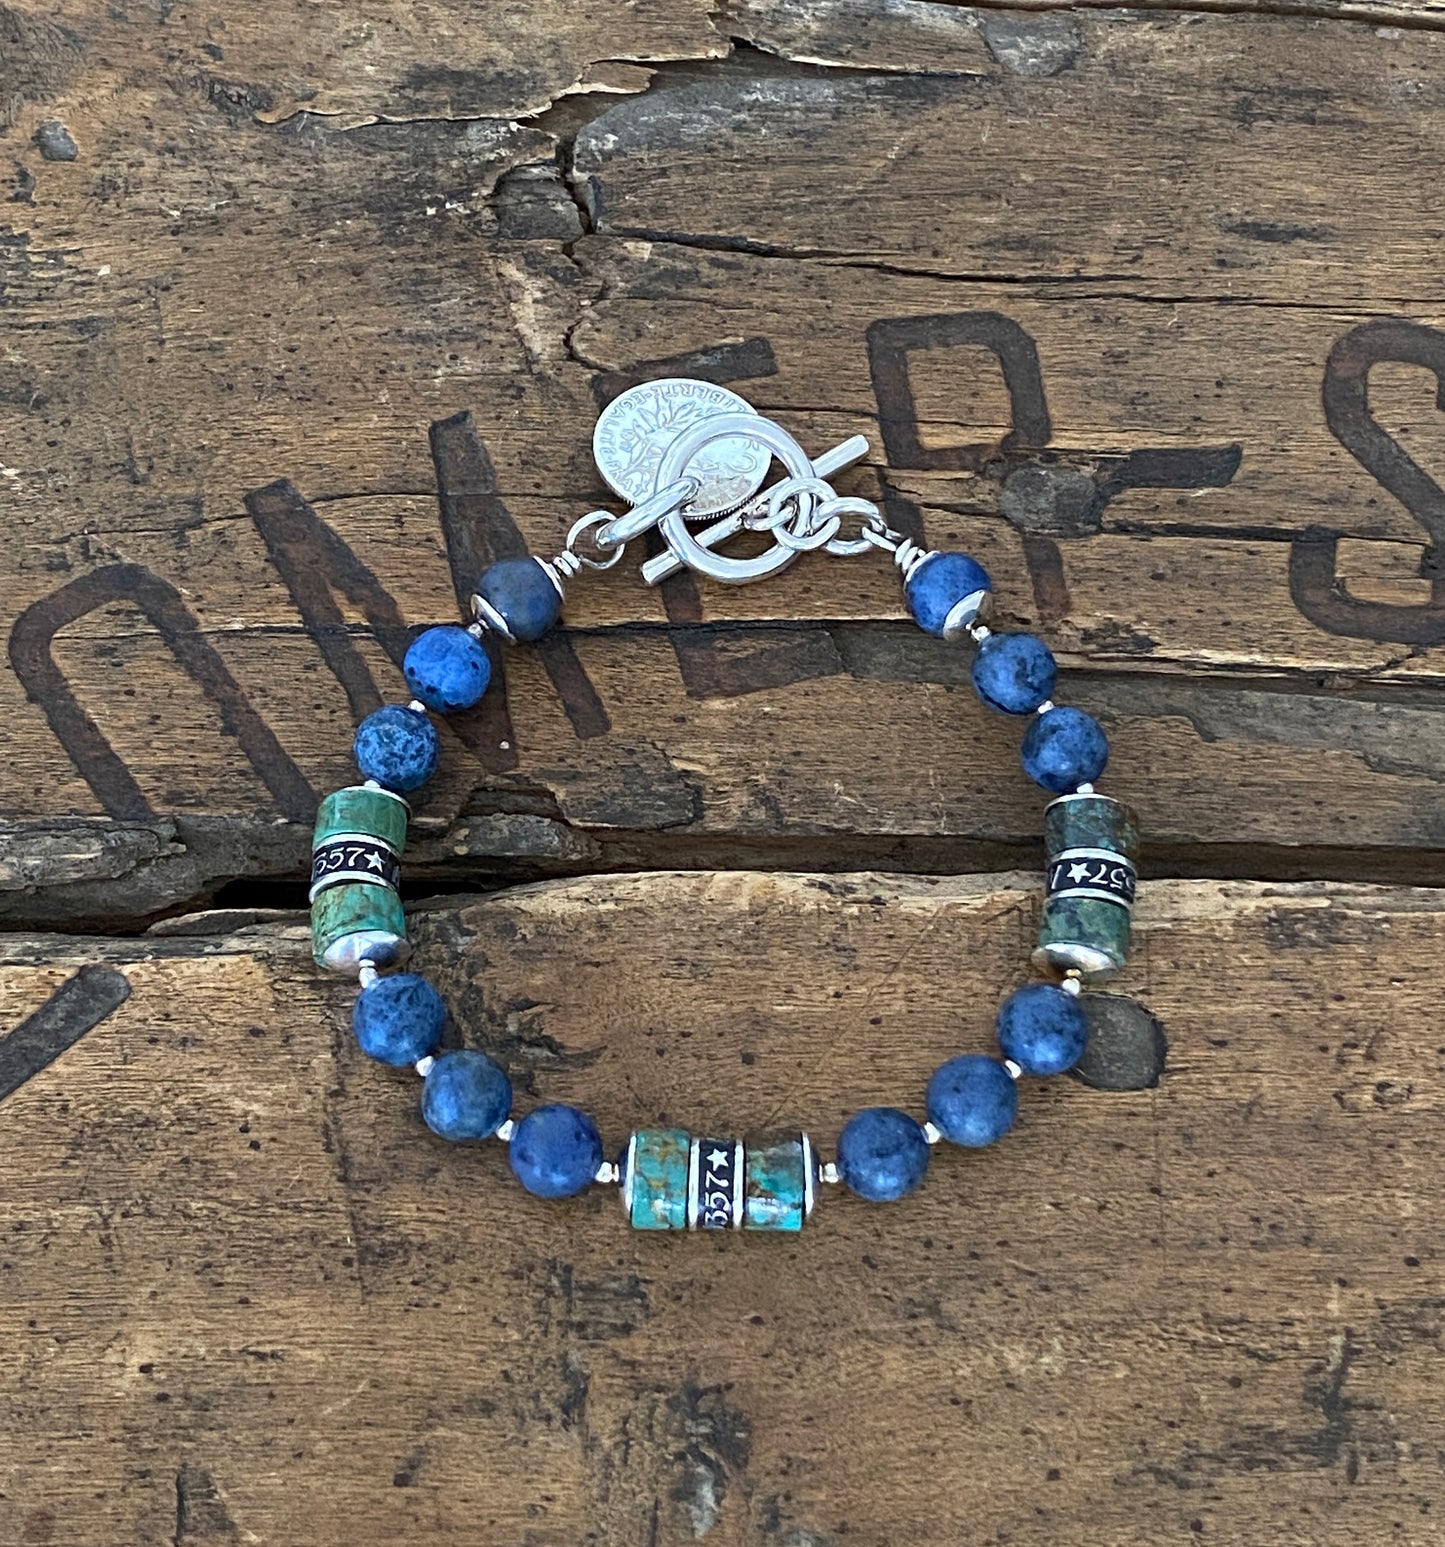 The Pacific Bracelet is made of, Turquoise, sterling silver, Vintage coin and Dumortierite 8mm Beads.